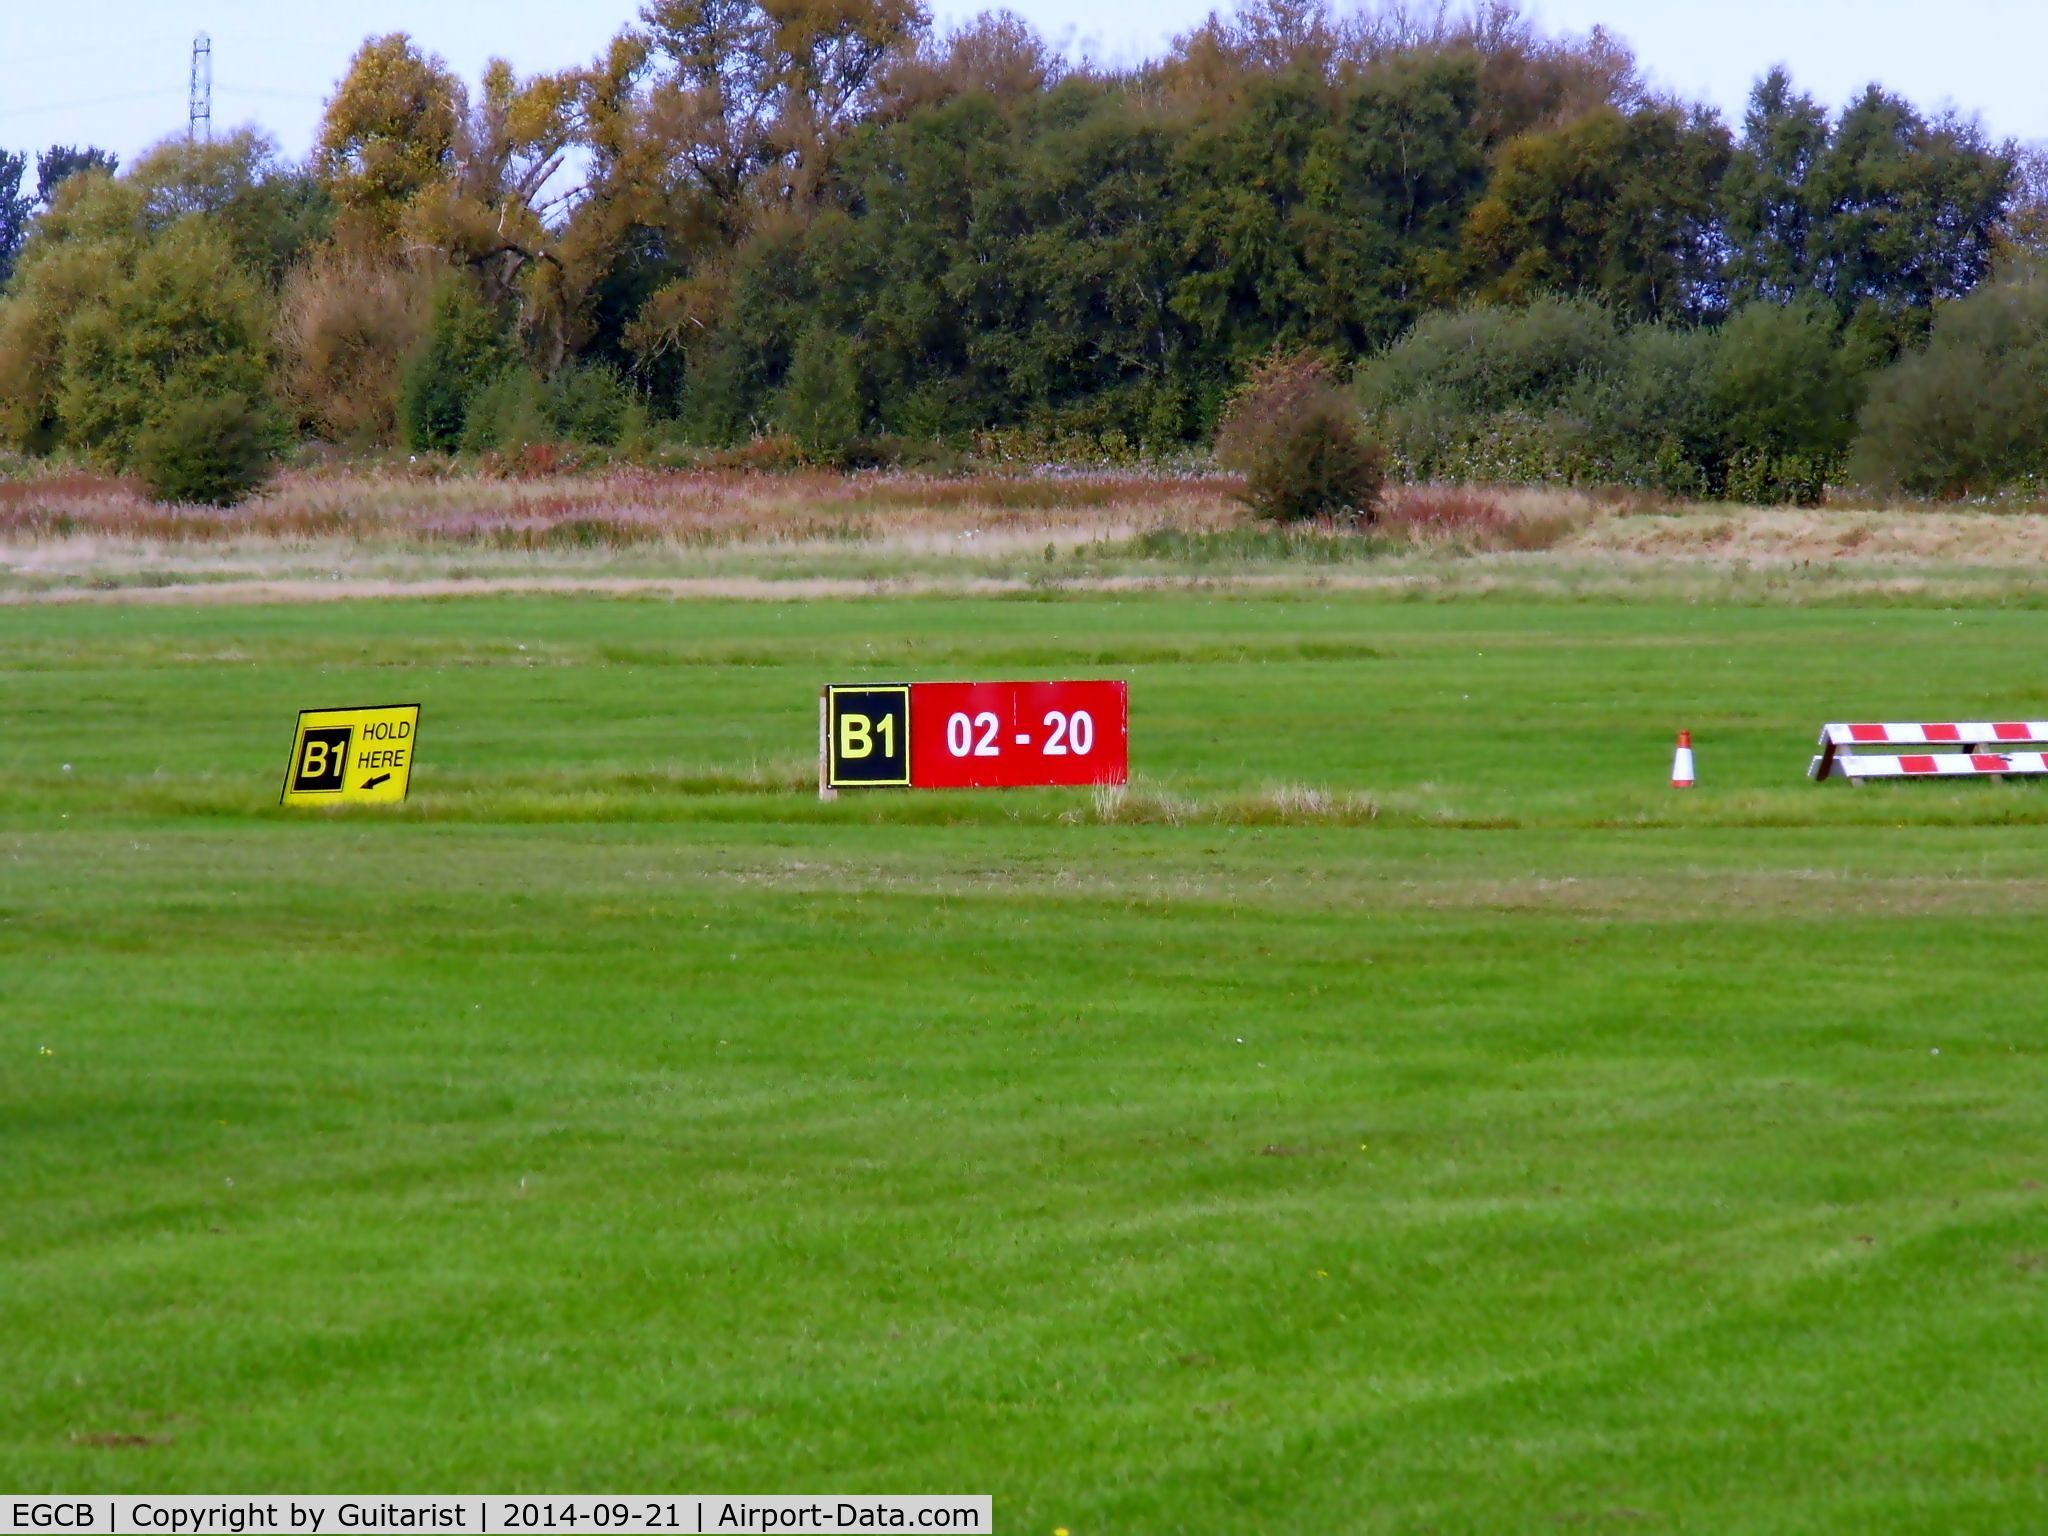 City Airport Manchester, Manchester, England United Kingdom (EGCB) - One of the taxiways at the City Airport Manchester